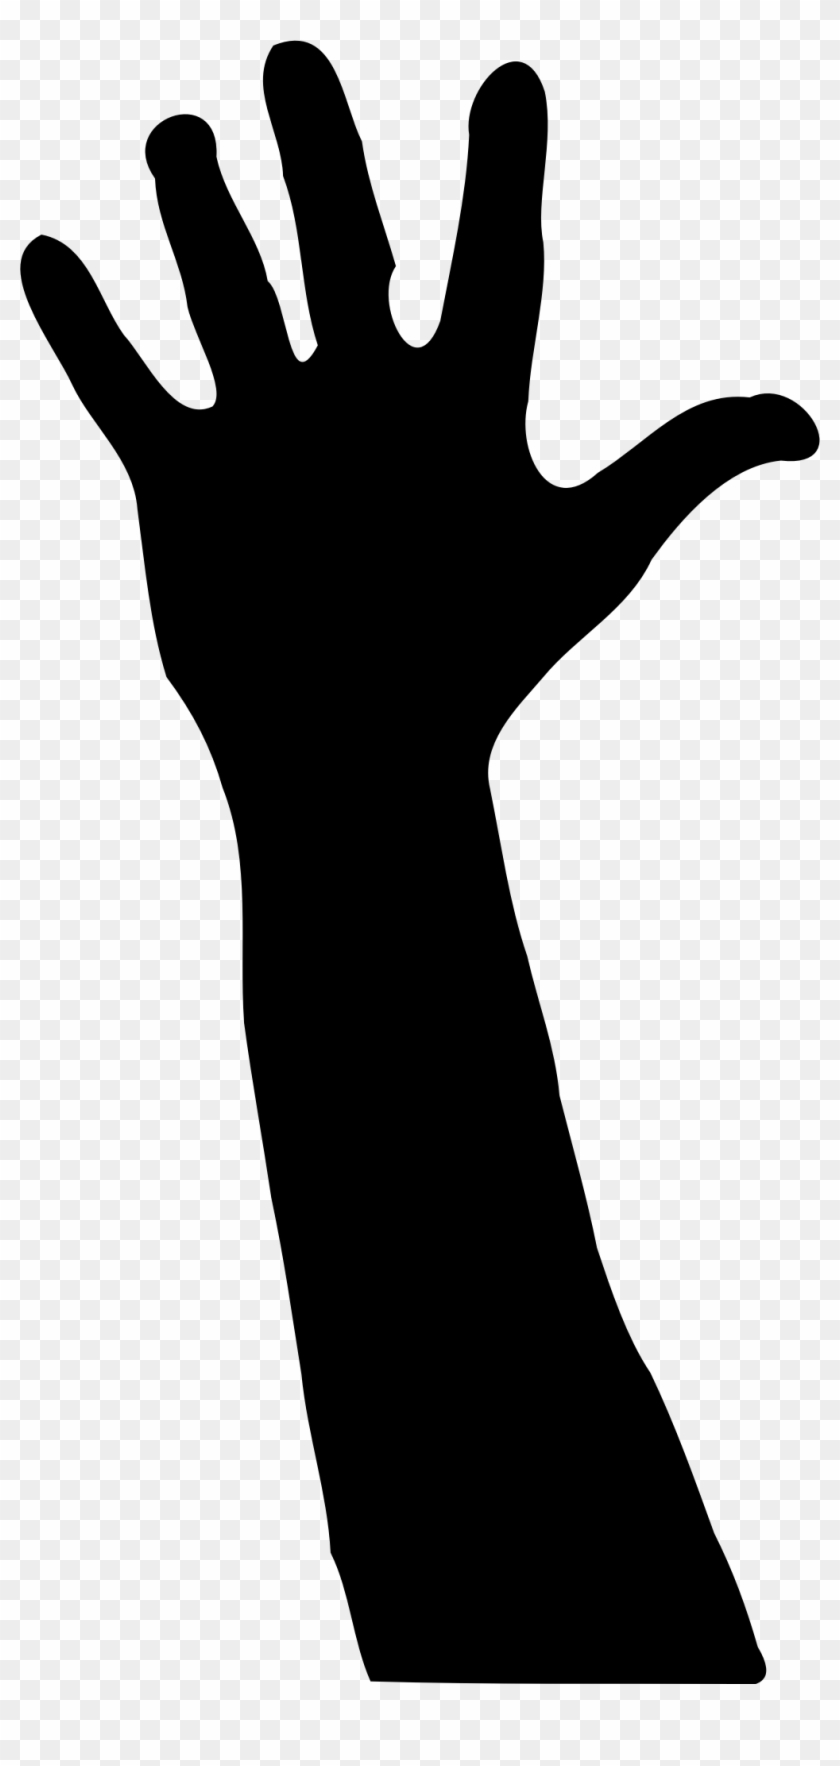 Free Praying Hands Clipart - Hand Reaching Up Silhouette #114656